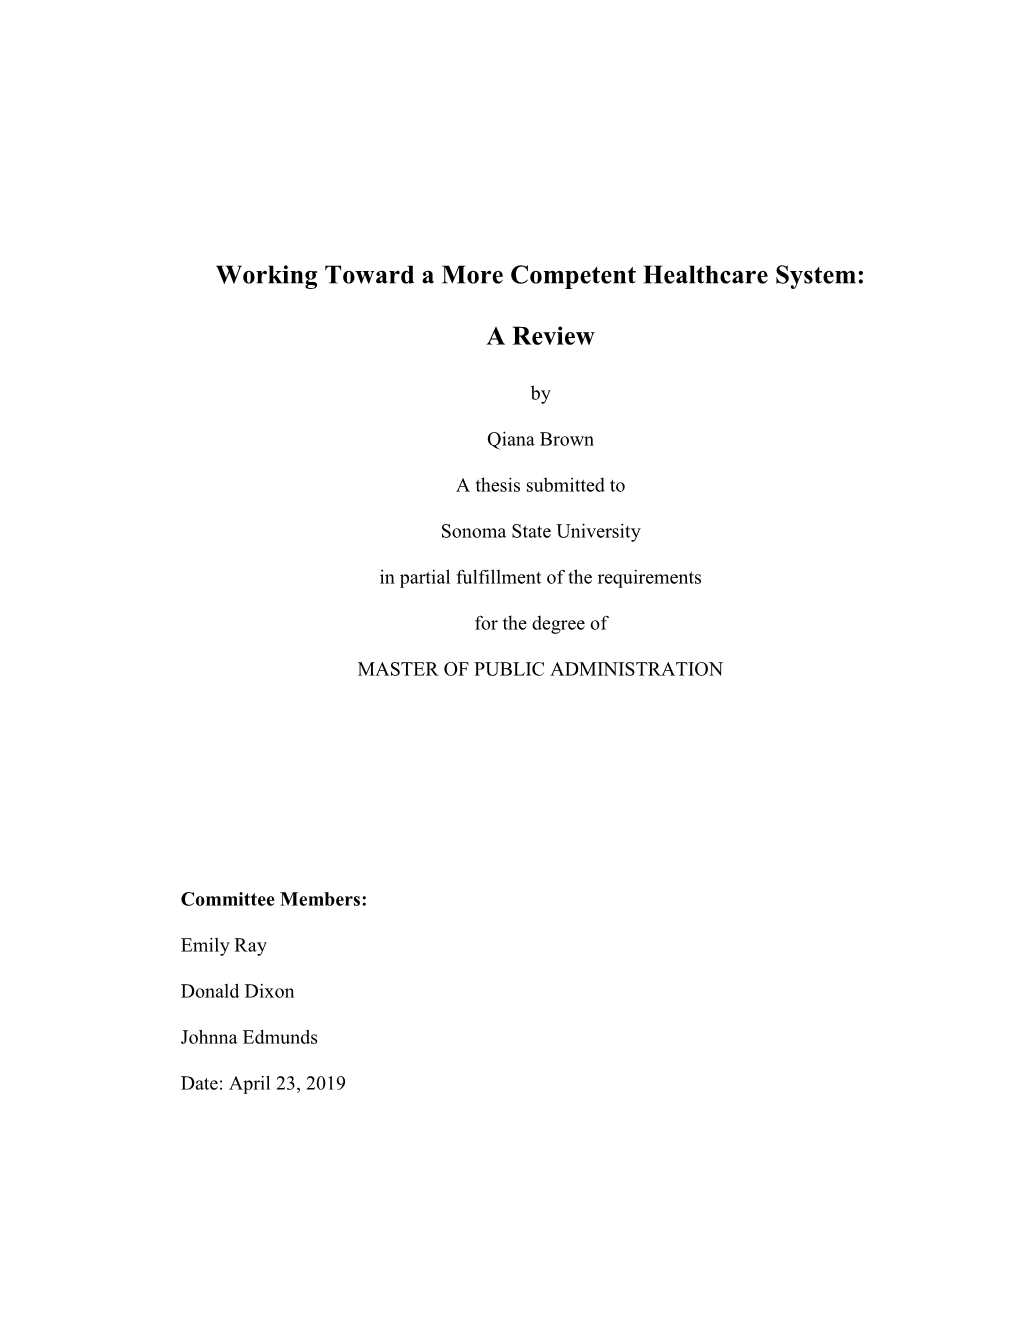 Working Toward a More Competent Healthcare System: a Review